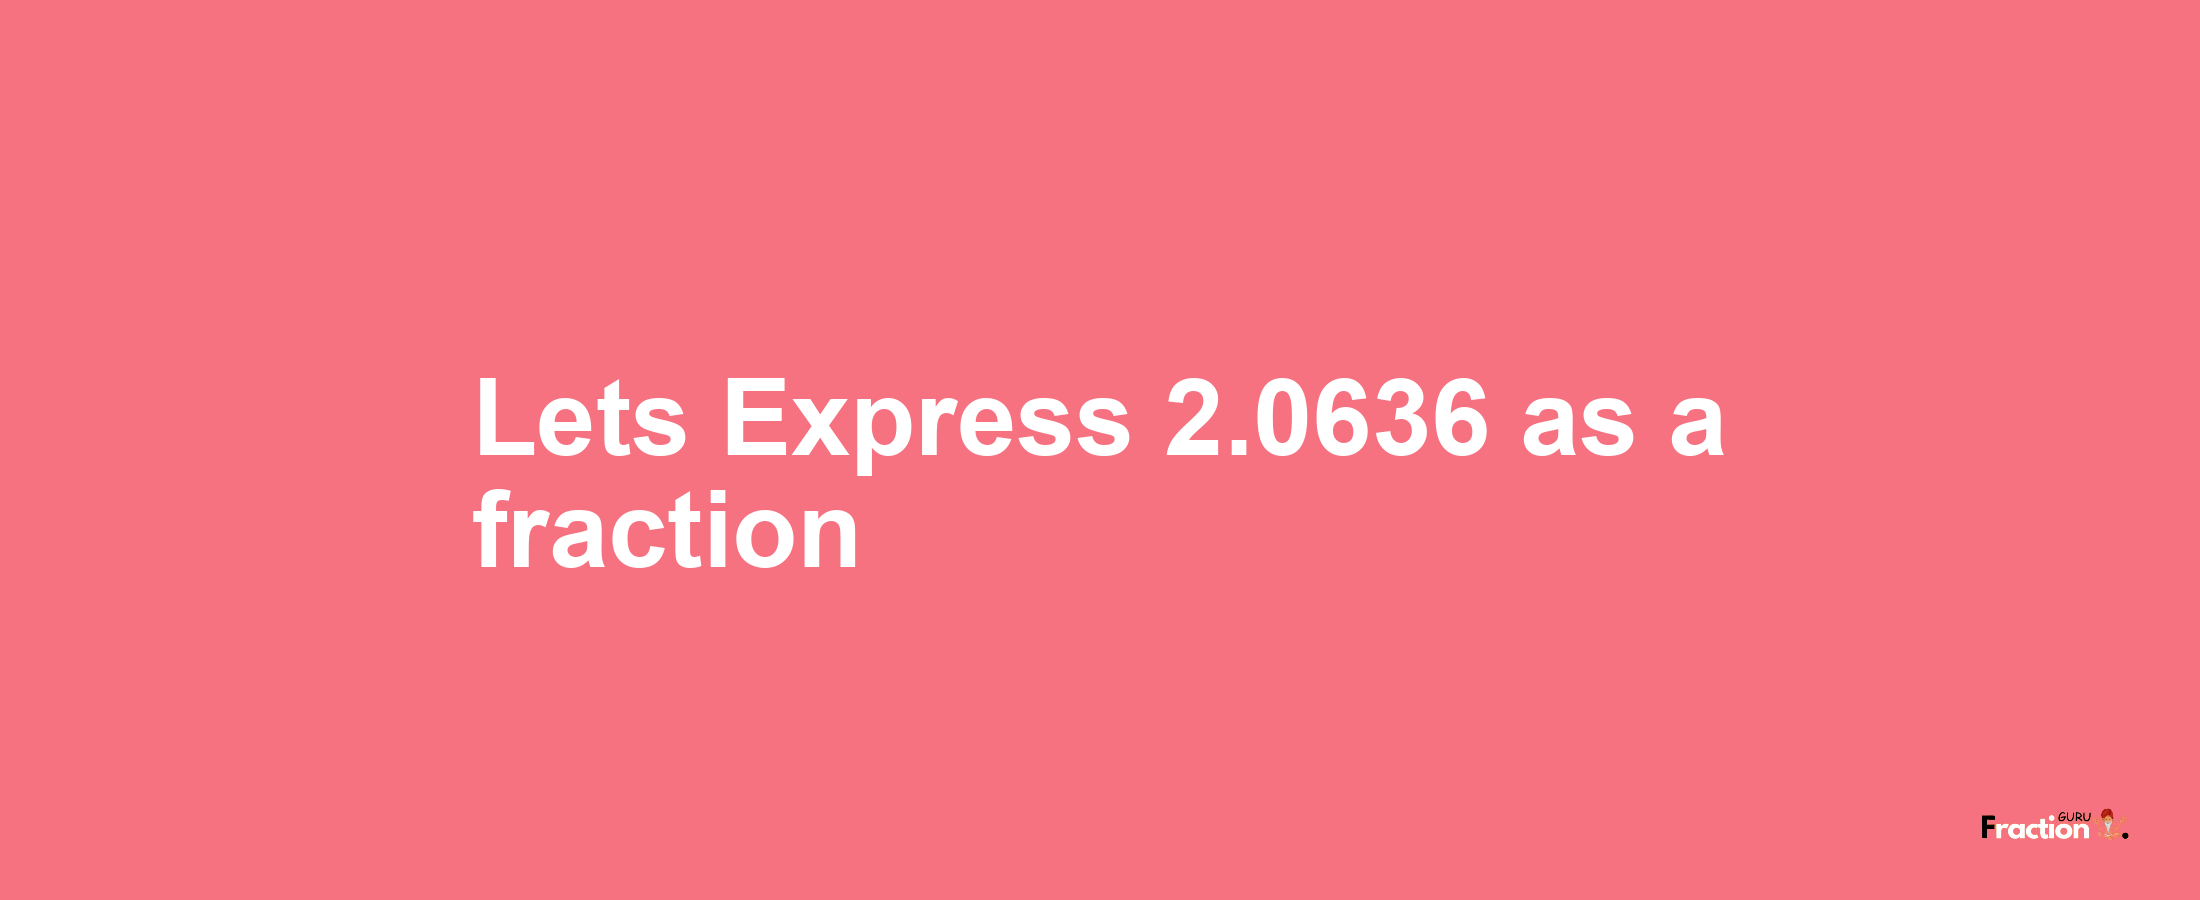 Lets Express 2.0636 as afraction